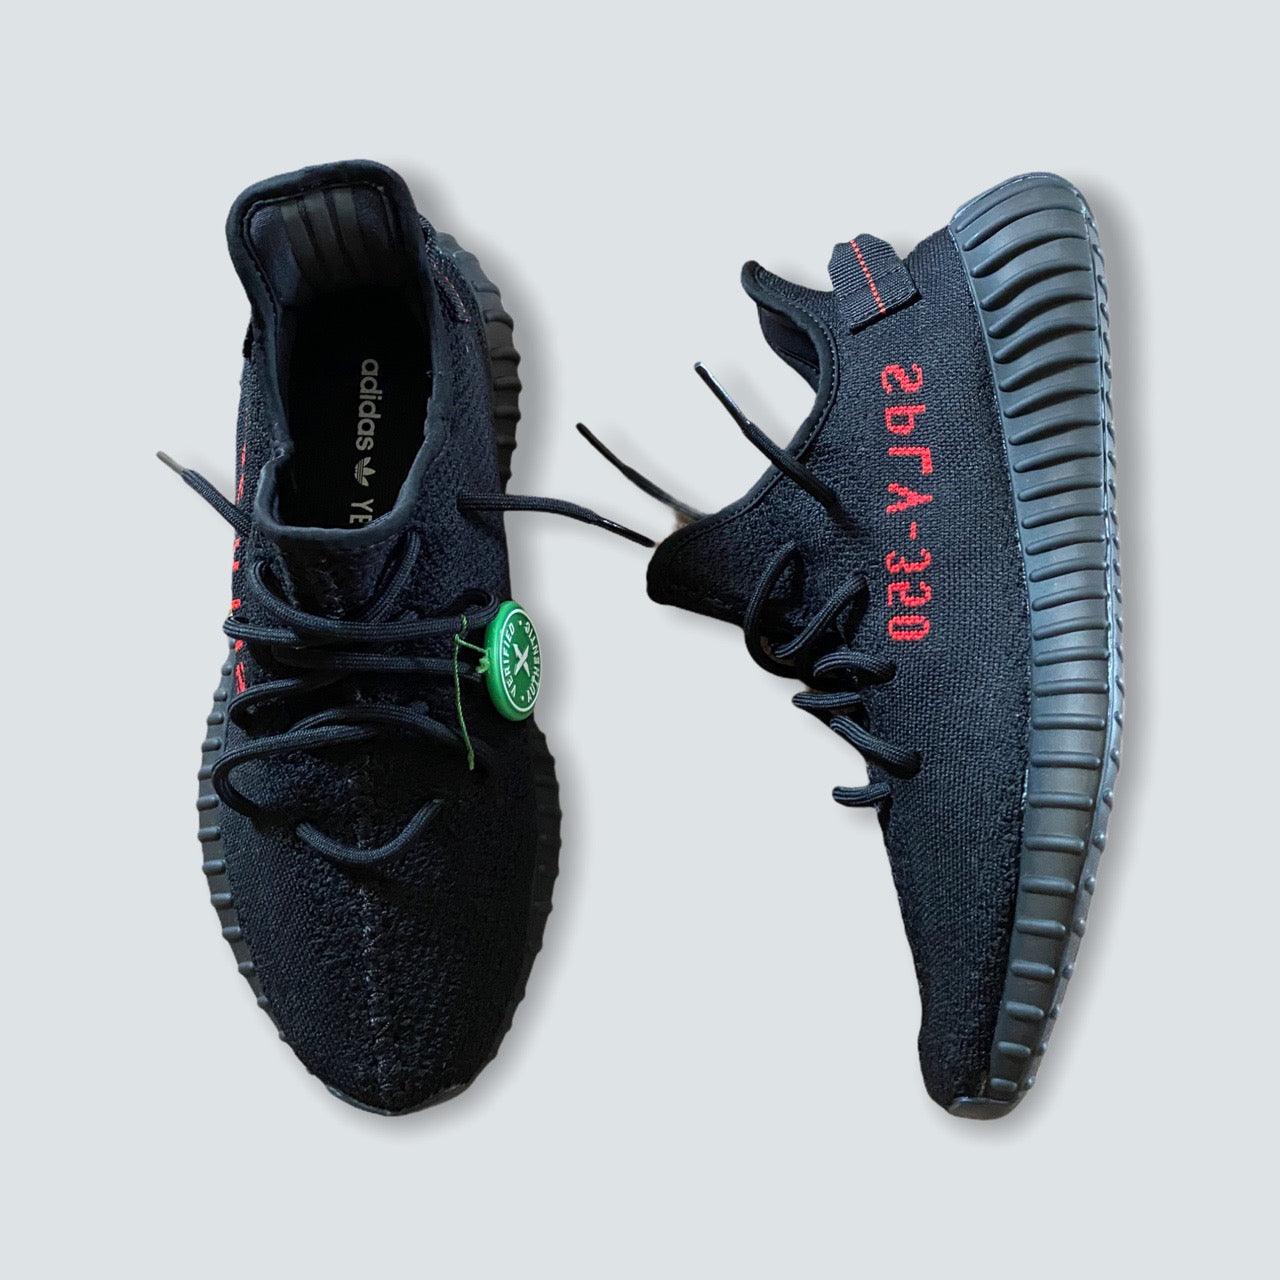 Brand new Yeezy V2 350 Breds black and red + stock x tag (uk9.5) - Known Source